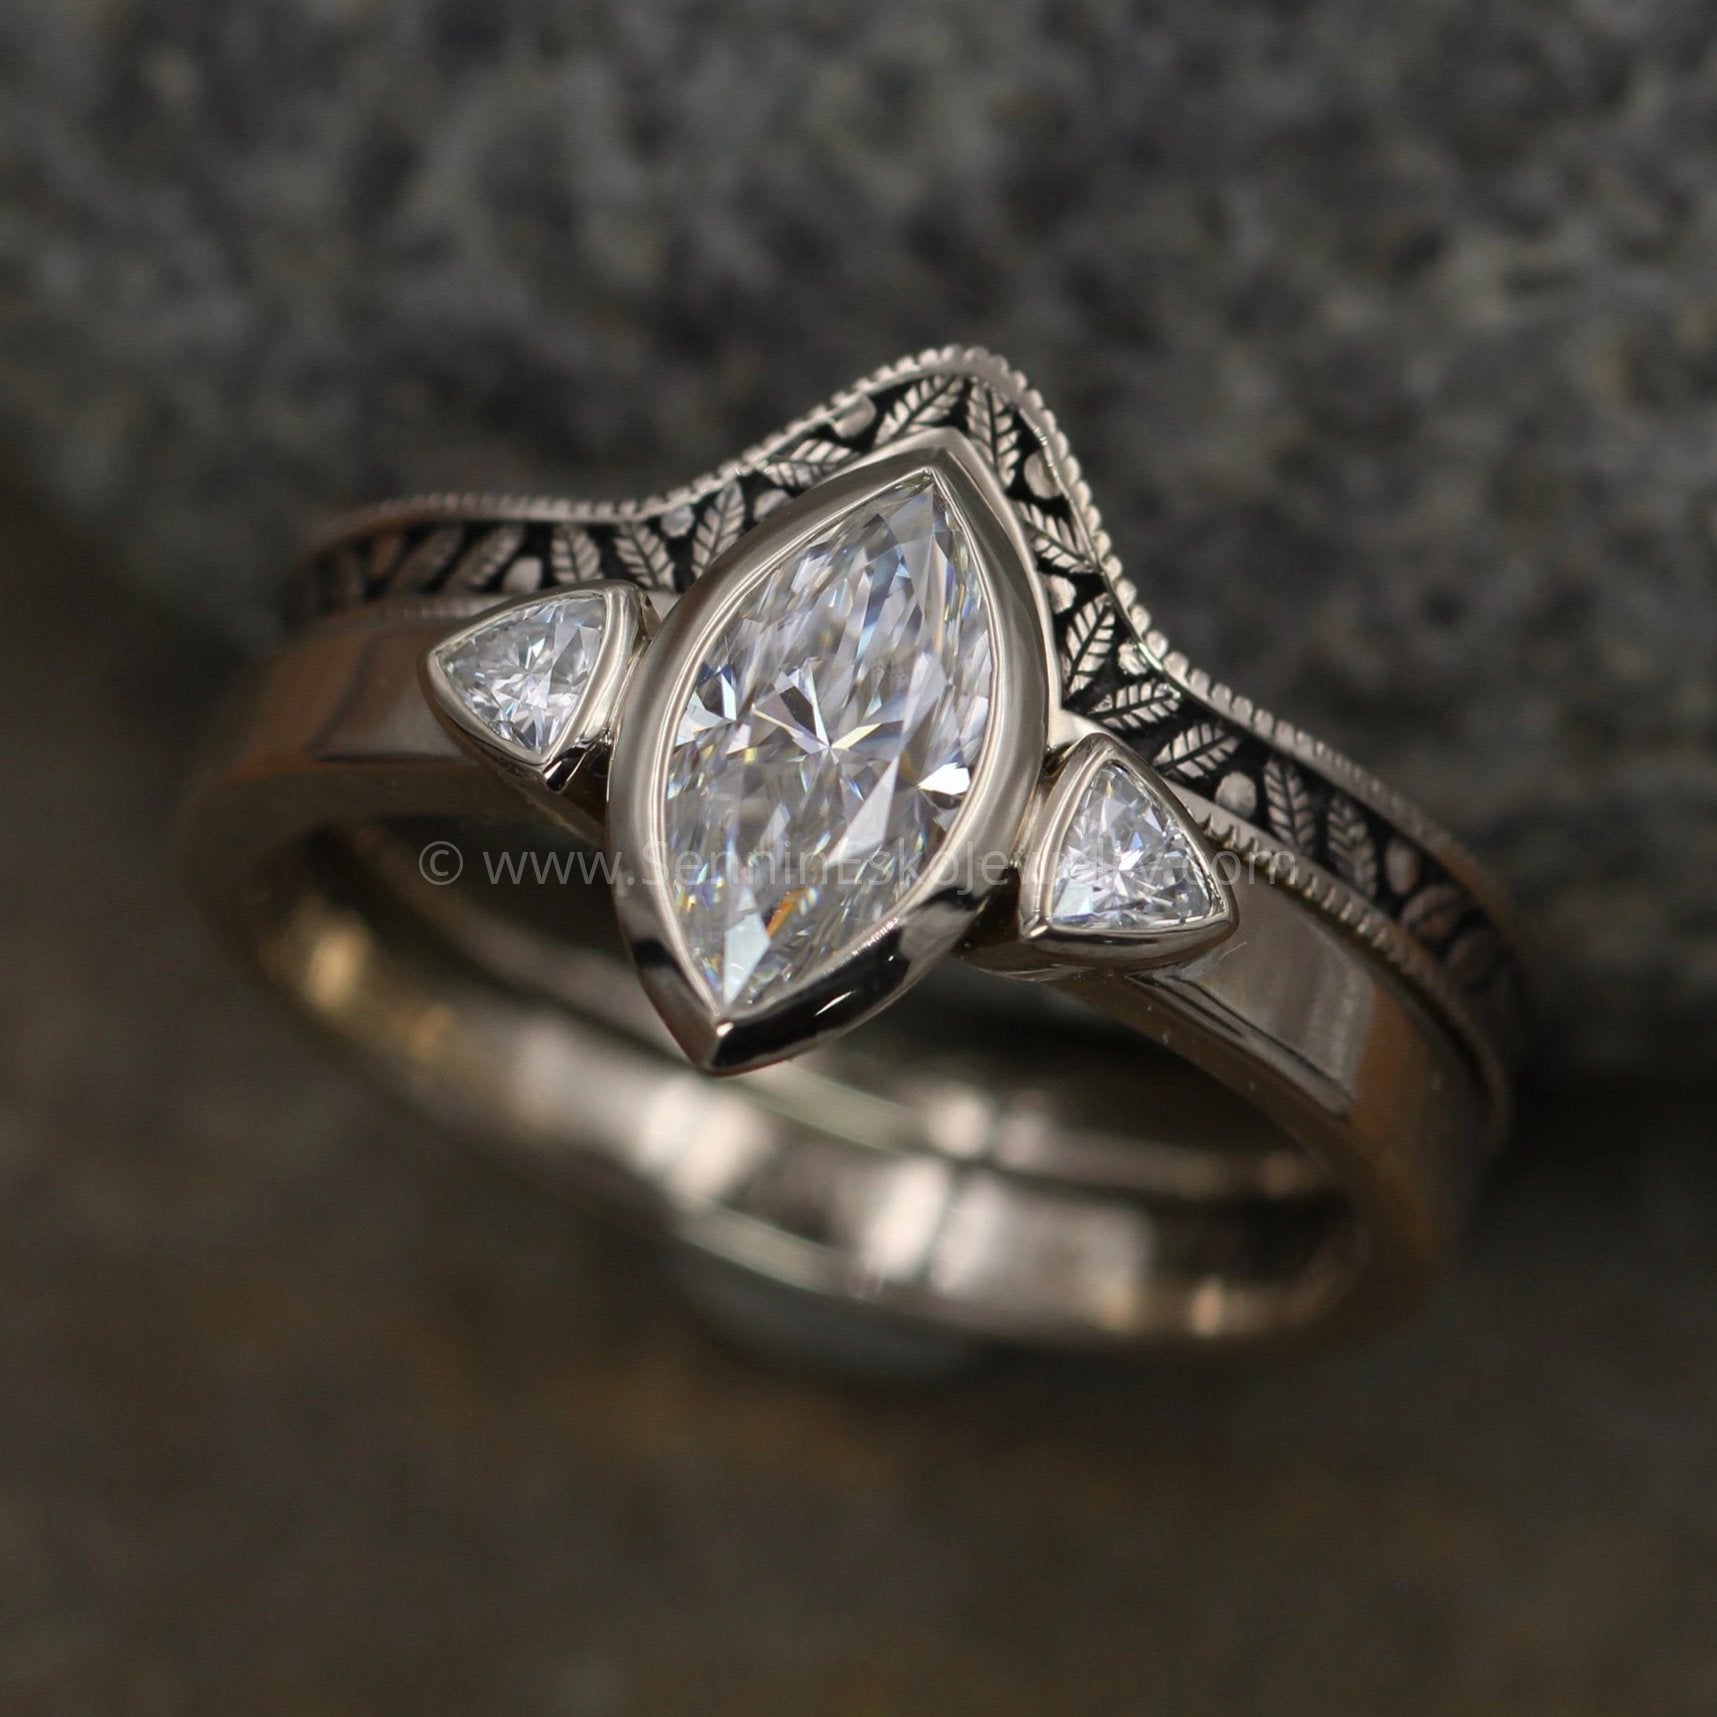 Explore Antique Engagement Ring Styles | 4Cs of Diamond Quality by GIA